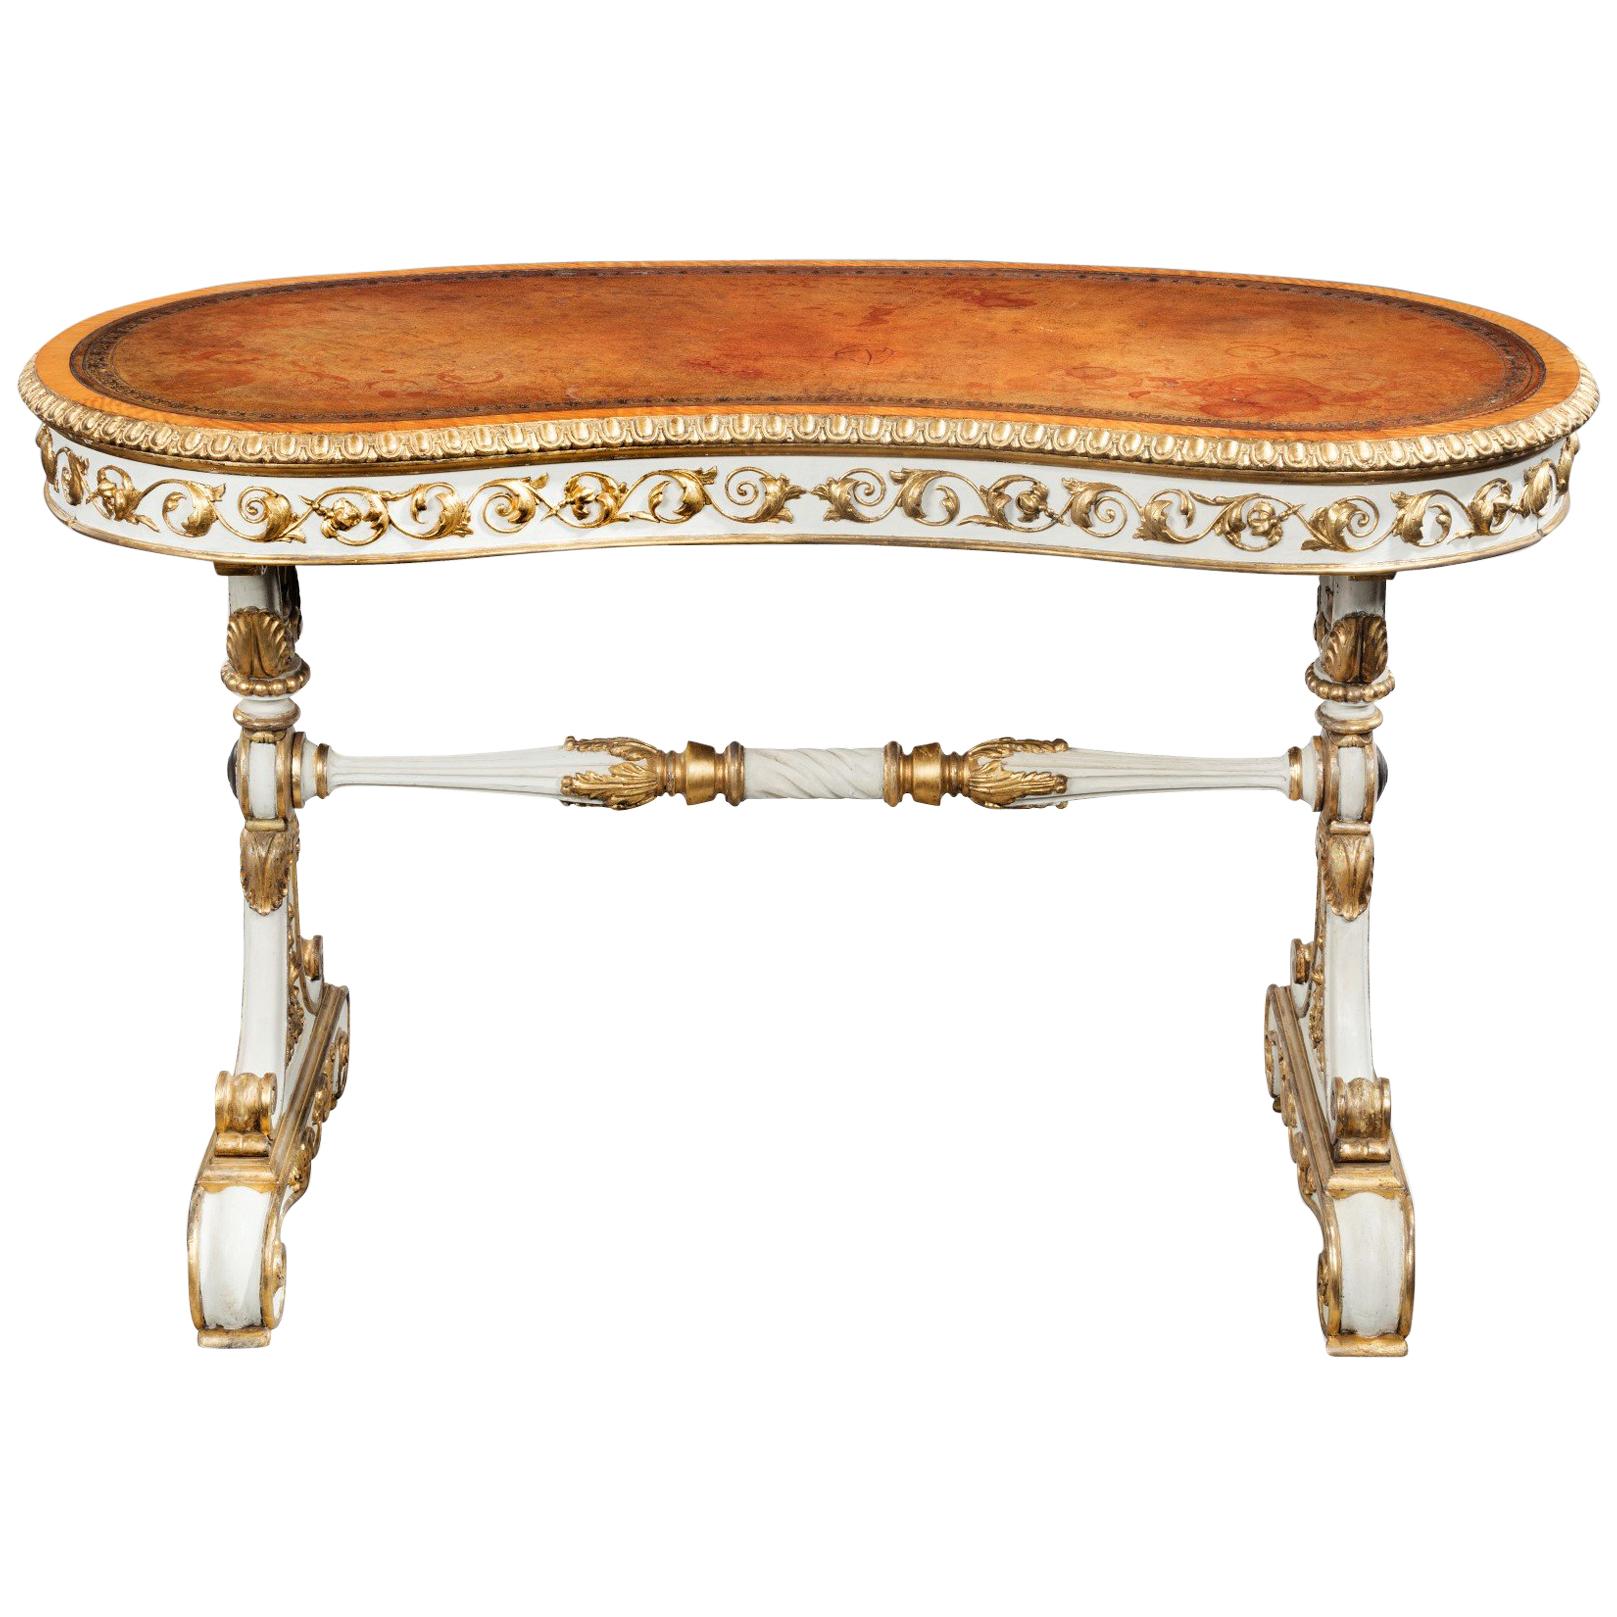 William IV Kidney Shaped Writing Table with Carved Giltwood and White Painted For Sale